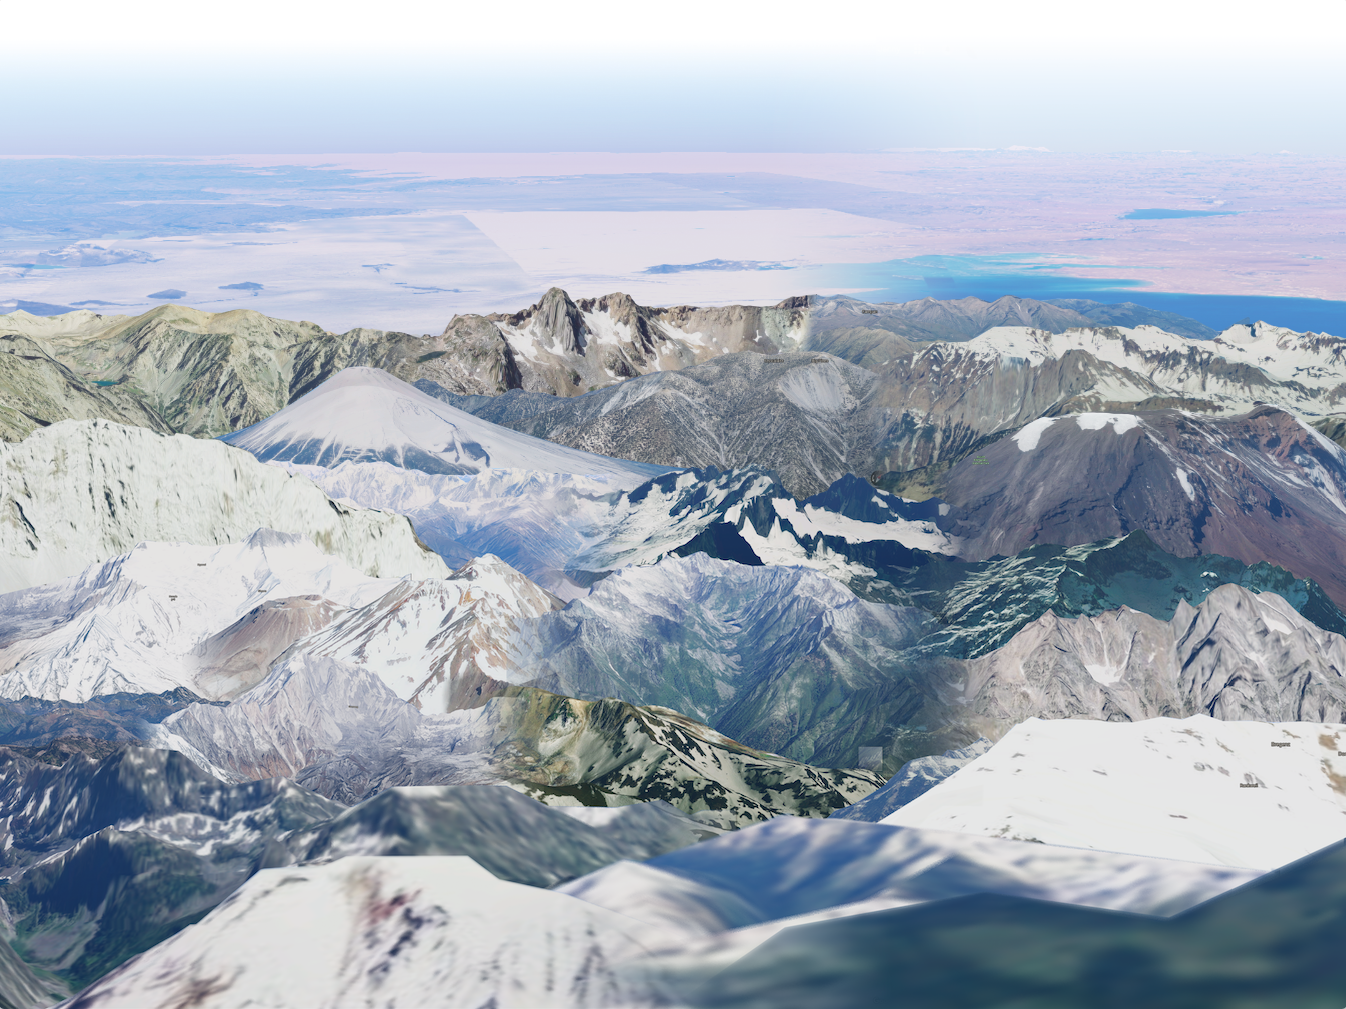 A digital collage of mountains from Google Earth, some high resolution and some low resolution, with a flat landscape extending into the background and a light blue sky. The different sets of mountains blend into each other along gradients and preserve some of the artifacts of Google Earth, like labels, squares of different colors, and the compass.